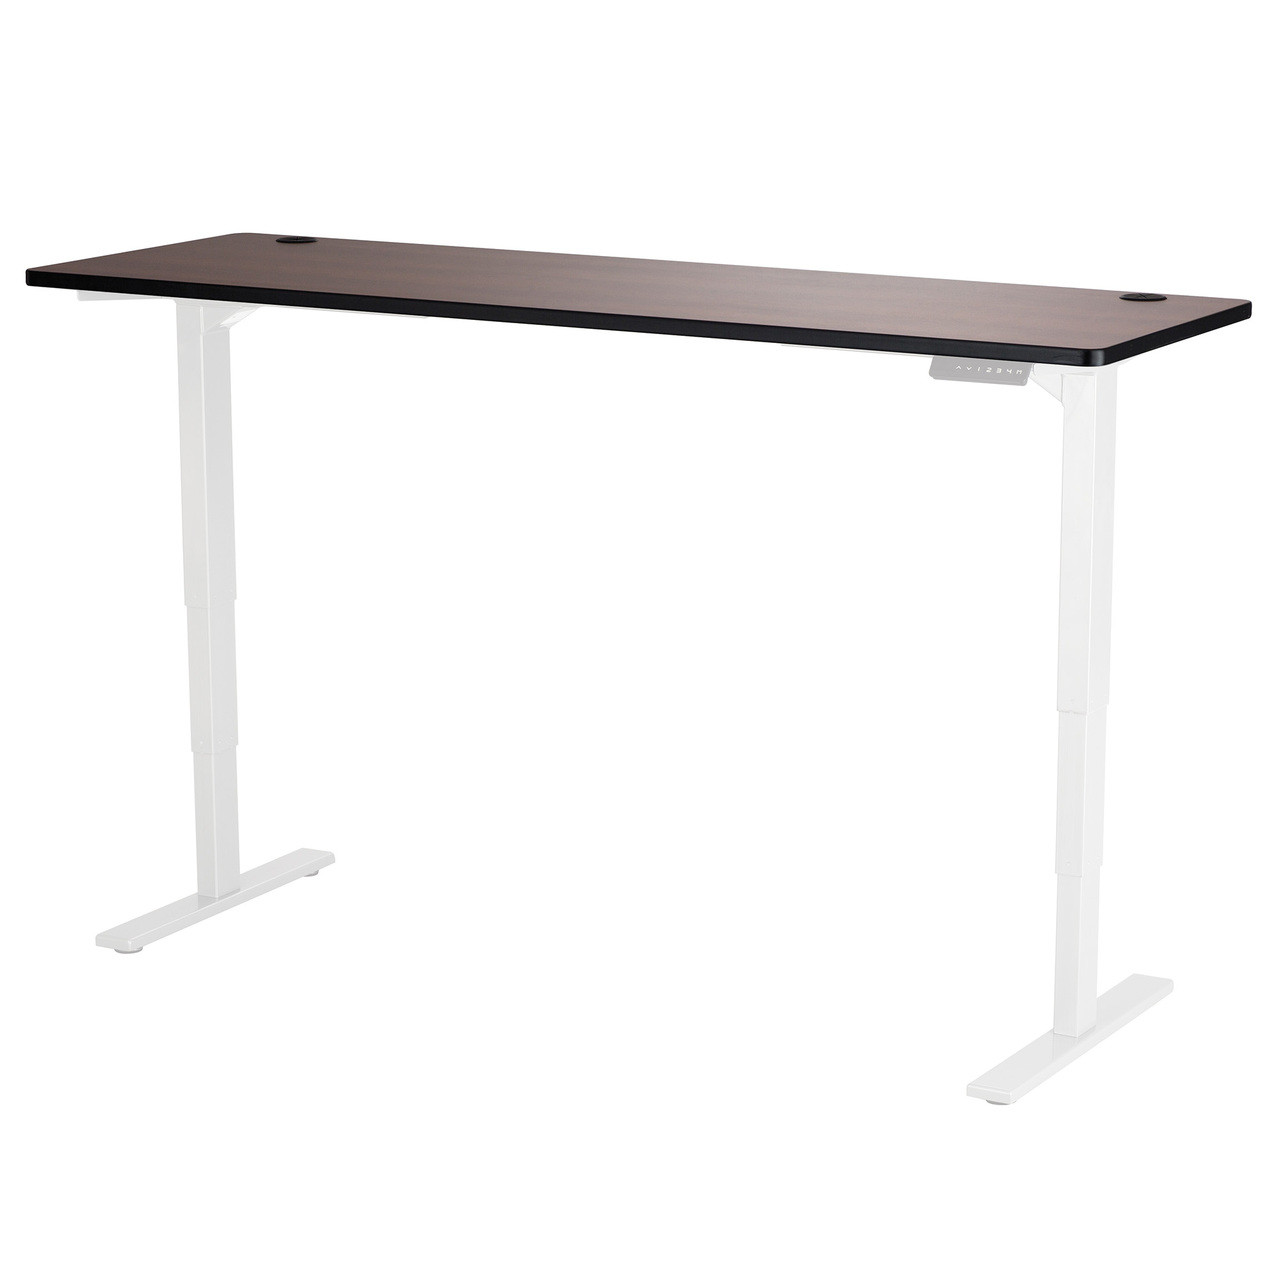 72 x 24" Top for Height-Adjustable Table